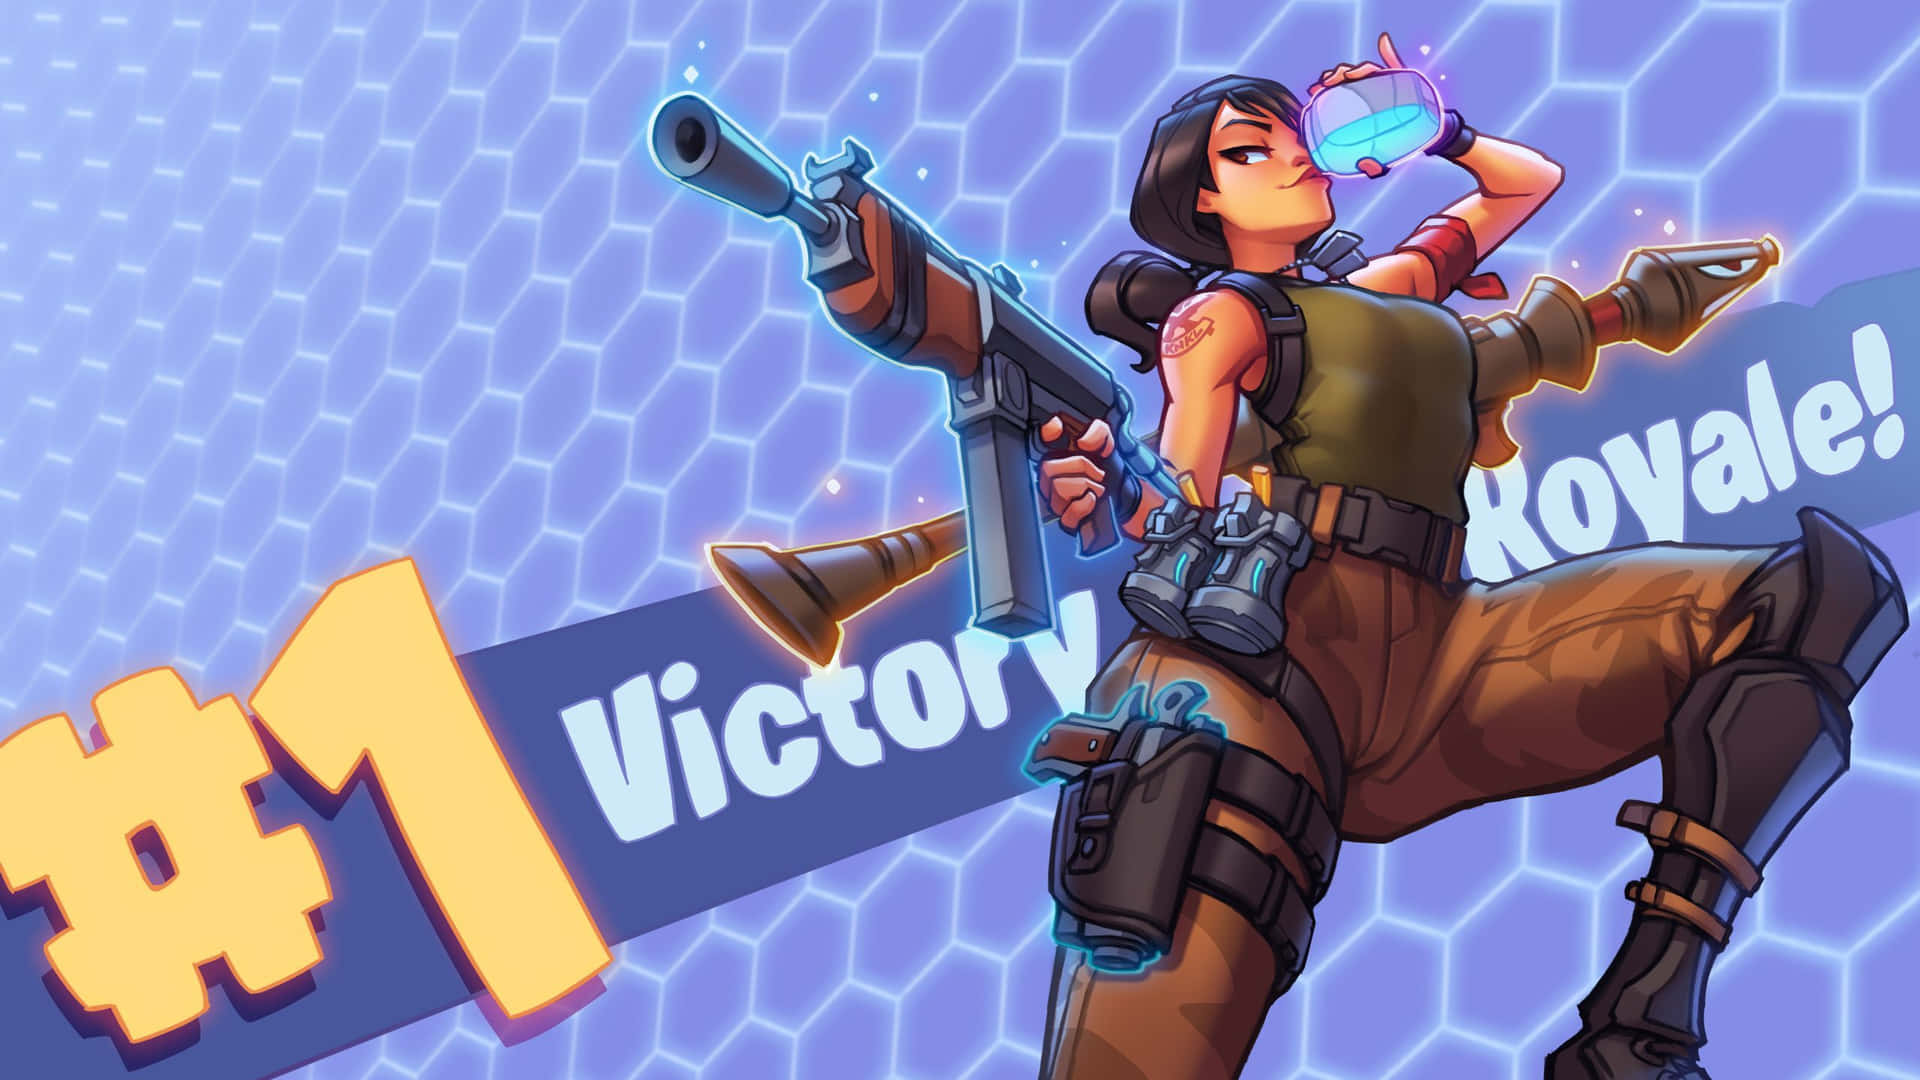 Brighten your day with this cute Fortnite image Wallpaper